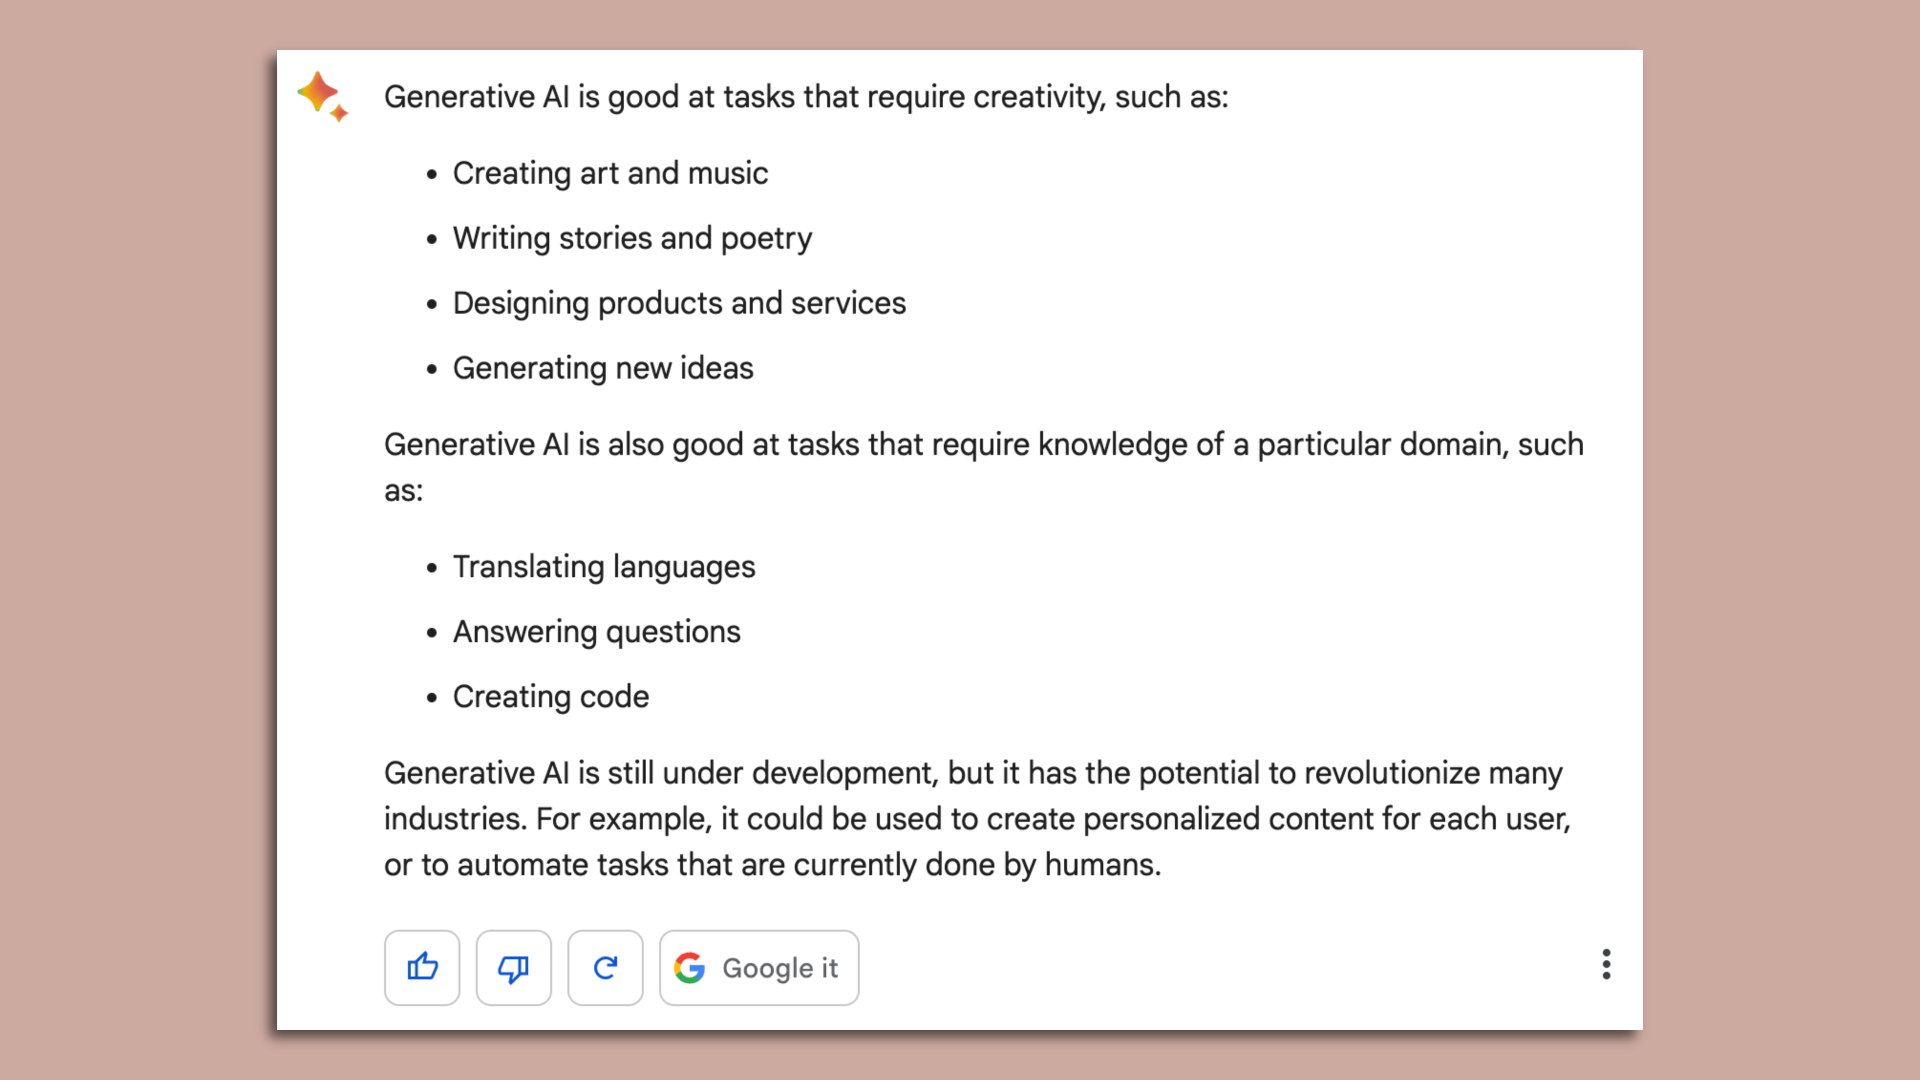 A screenshot of Google's Bard chatbot answering what today's generative AI is good at